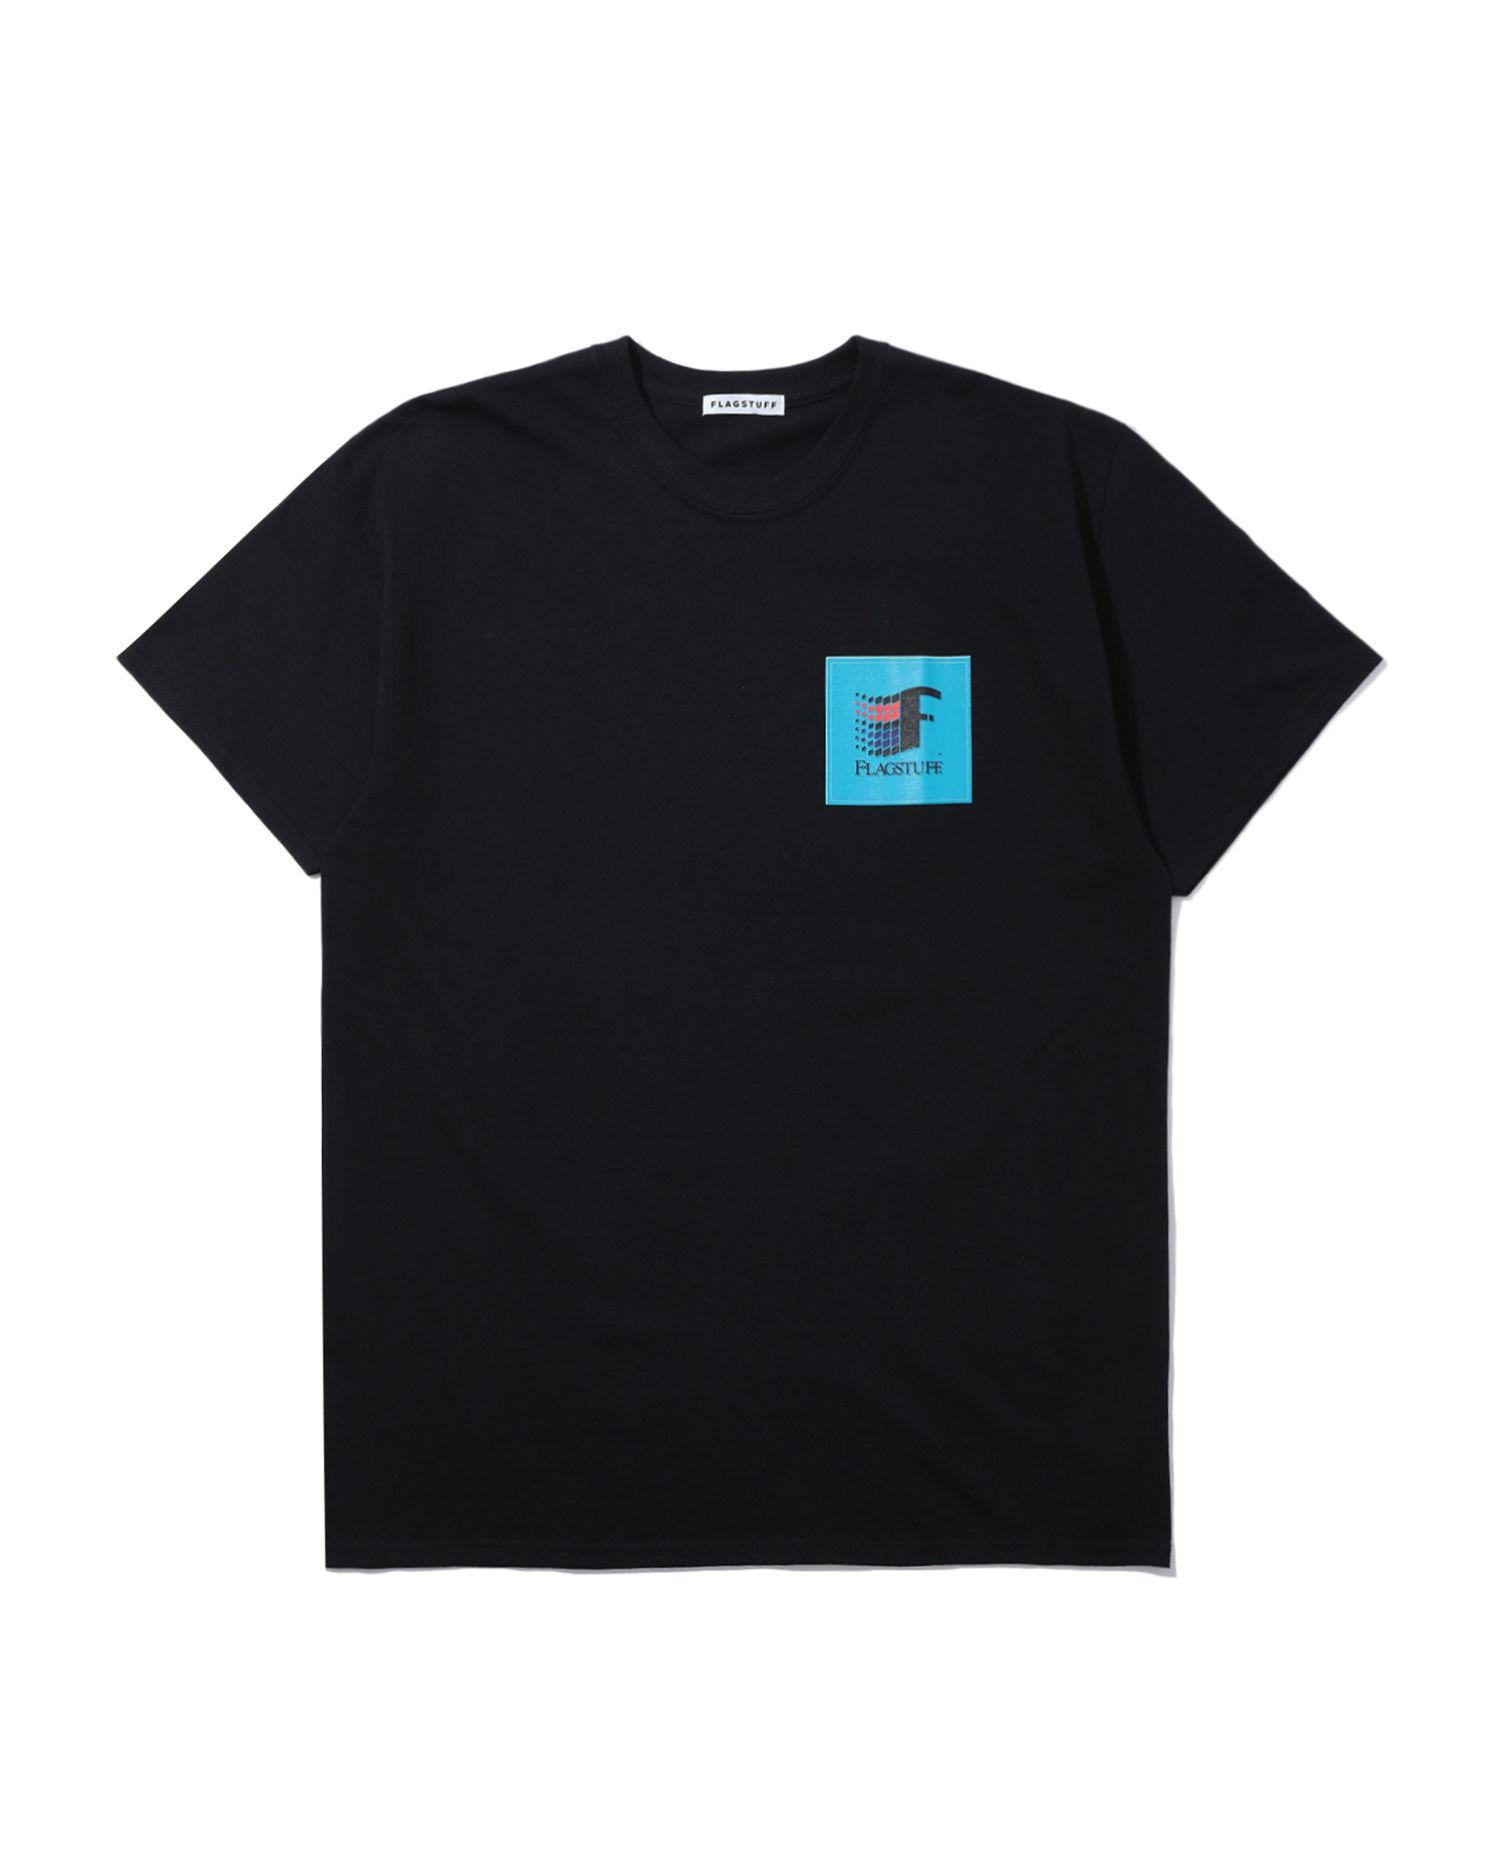 X Flagstuff graphic logo tee by BEAMS T